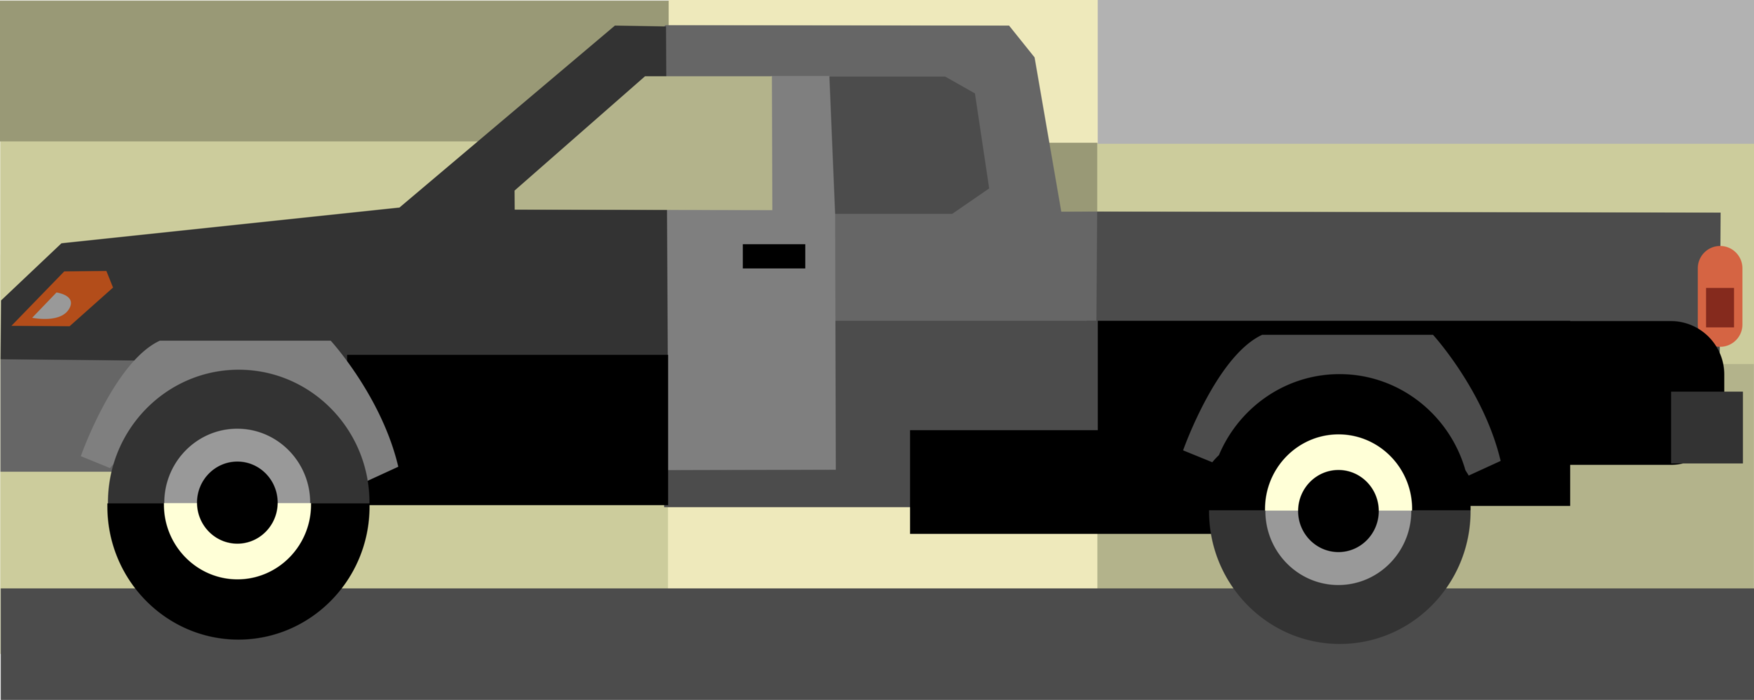 Vector Illustration of Four-Wheel Drive 4WD Four by Four Pickup Truck Automobile Motor Vehicle